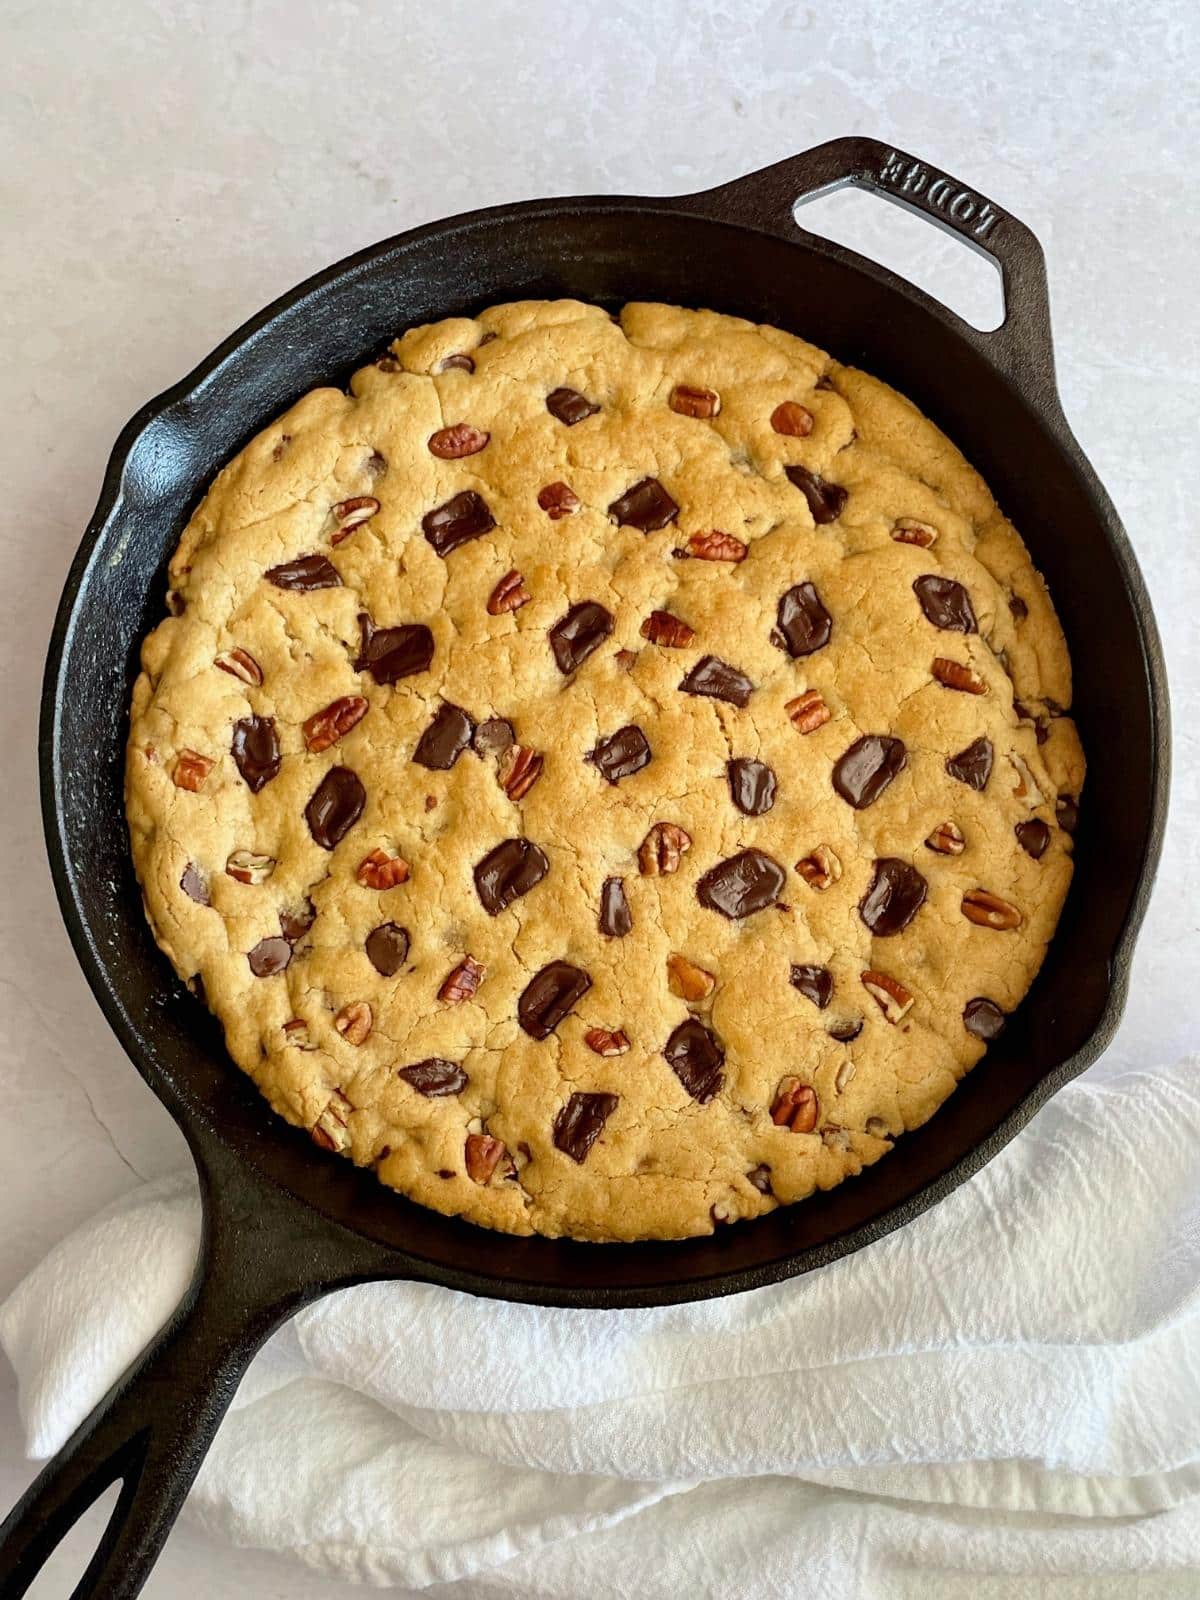 Chocolate chip cookie in deep dish pan.